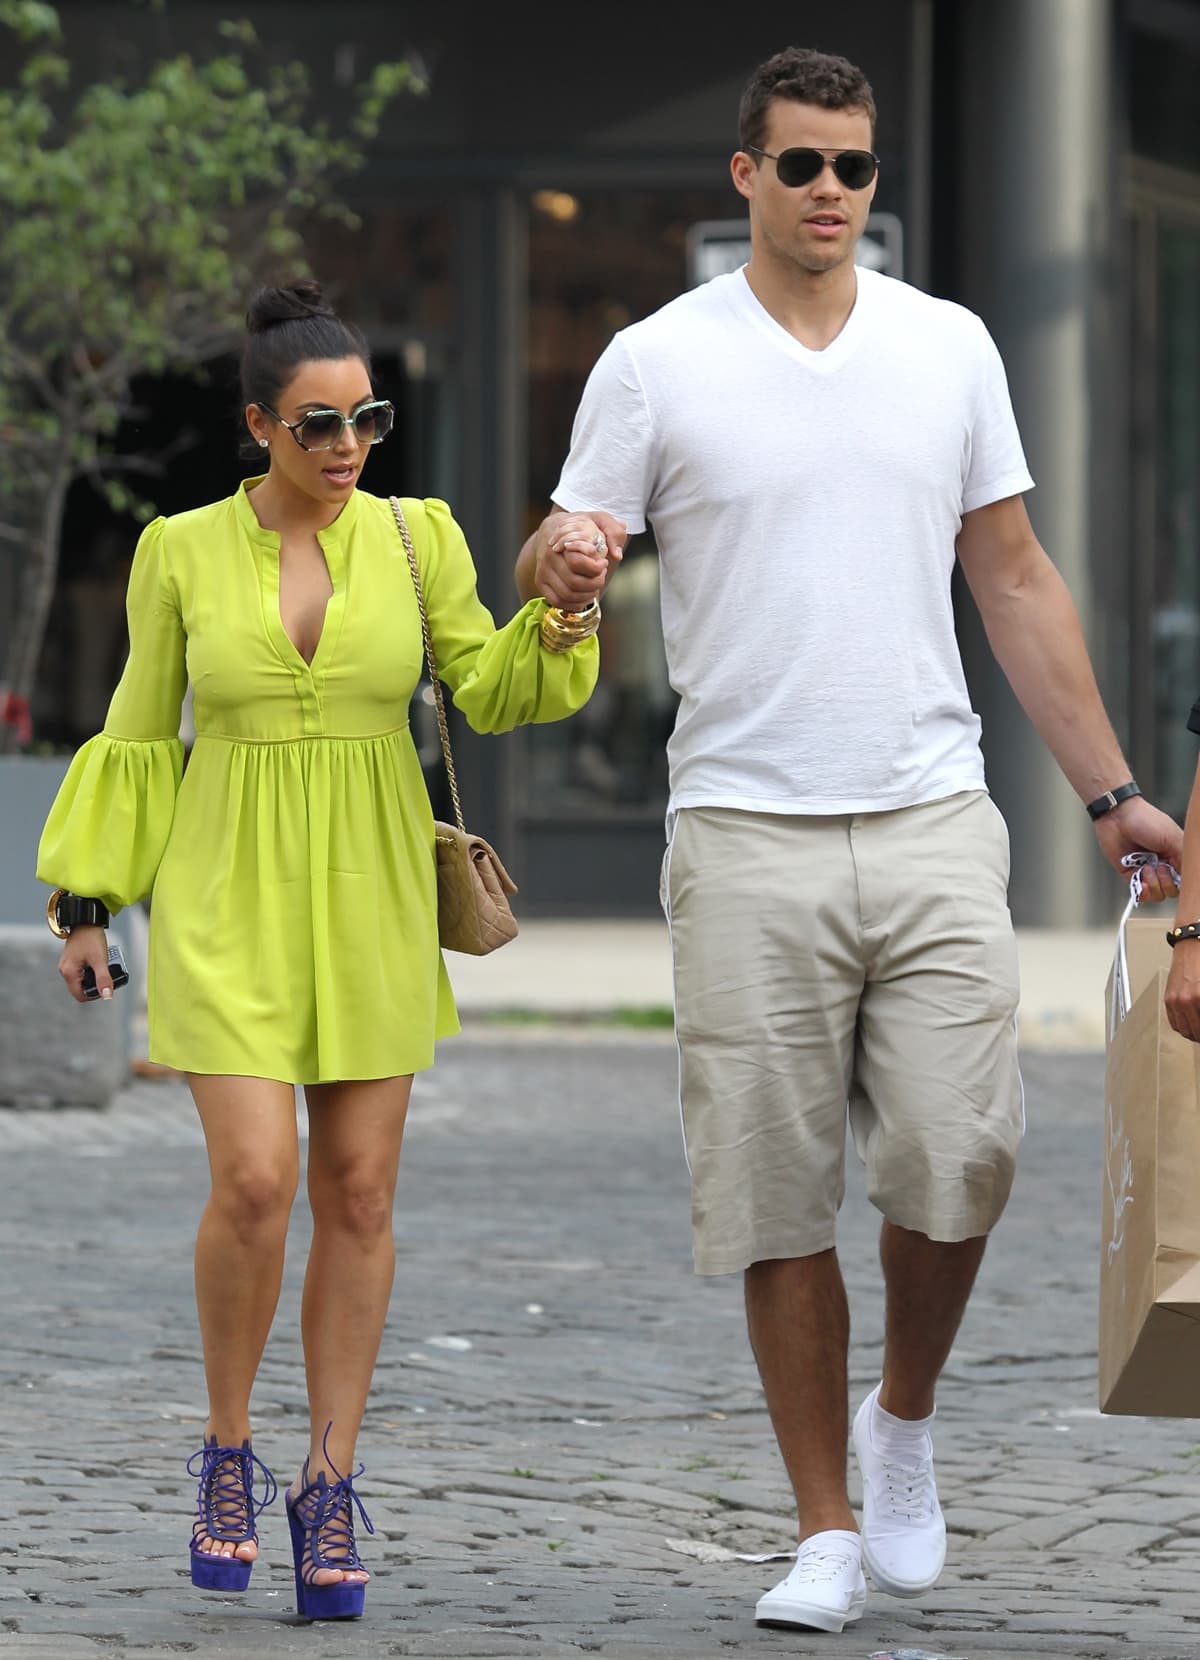 Kim Kardashian, alongside her fiancé, basketball star Kris Humphries, was spotted strolling through New York's trendy Meatpacking District on June 25, 2011